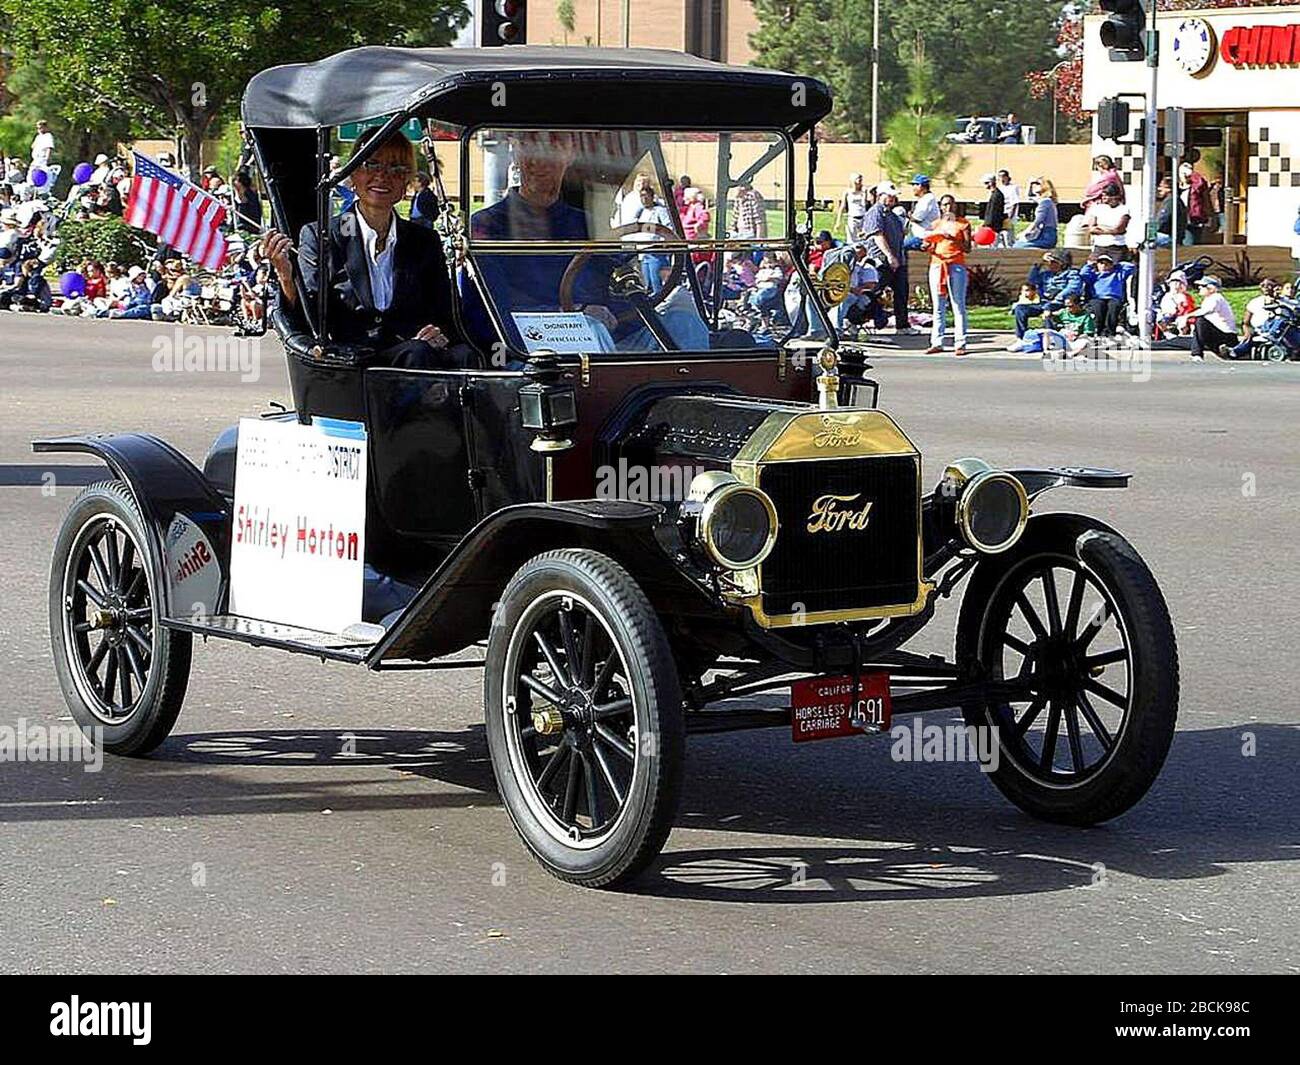 'English:  Image title: Model t cars parades Image from Public domain images website, http://www.public-domain-image.com/full-image/transportation-vehicles-public-domain-images-pictures/cars-automobile-public-domain-images-pictures/model-t-cars-parades.jpg.html; Not given  Transferred by Fæ on 2013-03-01; http://www.public-domain-image.com/public-domain-images-pictures-free-stock-photos/transportation-vehicles-public-domain-images-pictures/cars-automobile-public-domain-images-pictures/model-t-cars-parades.jpg; Jon Sullivan; ' Stock Photo